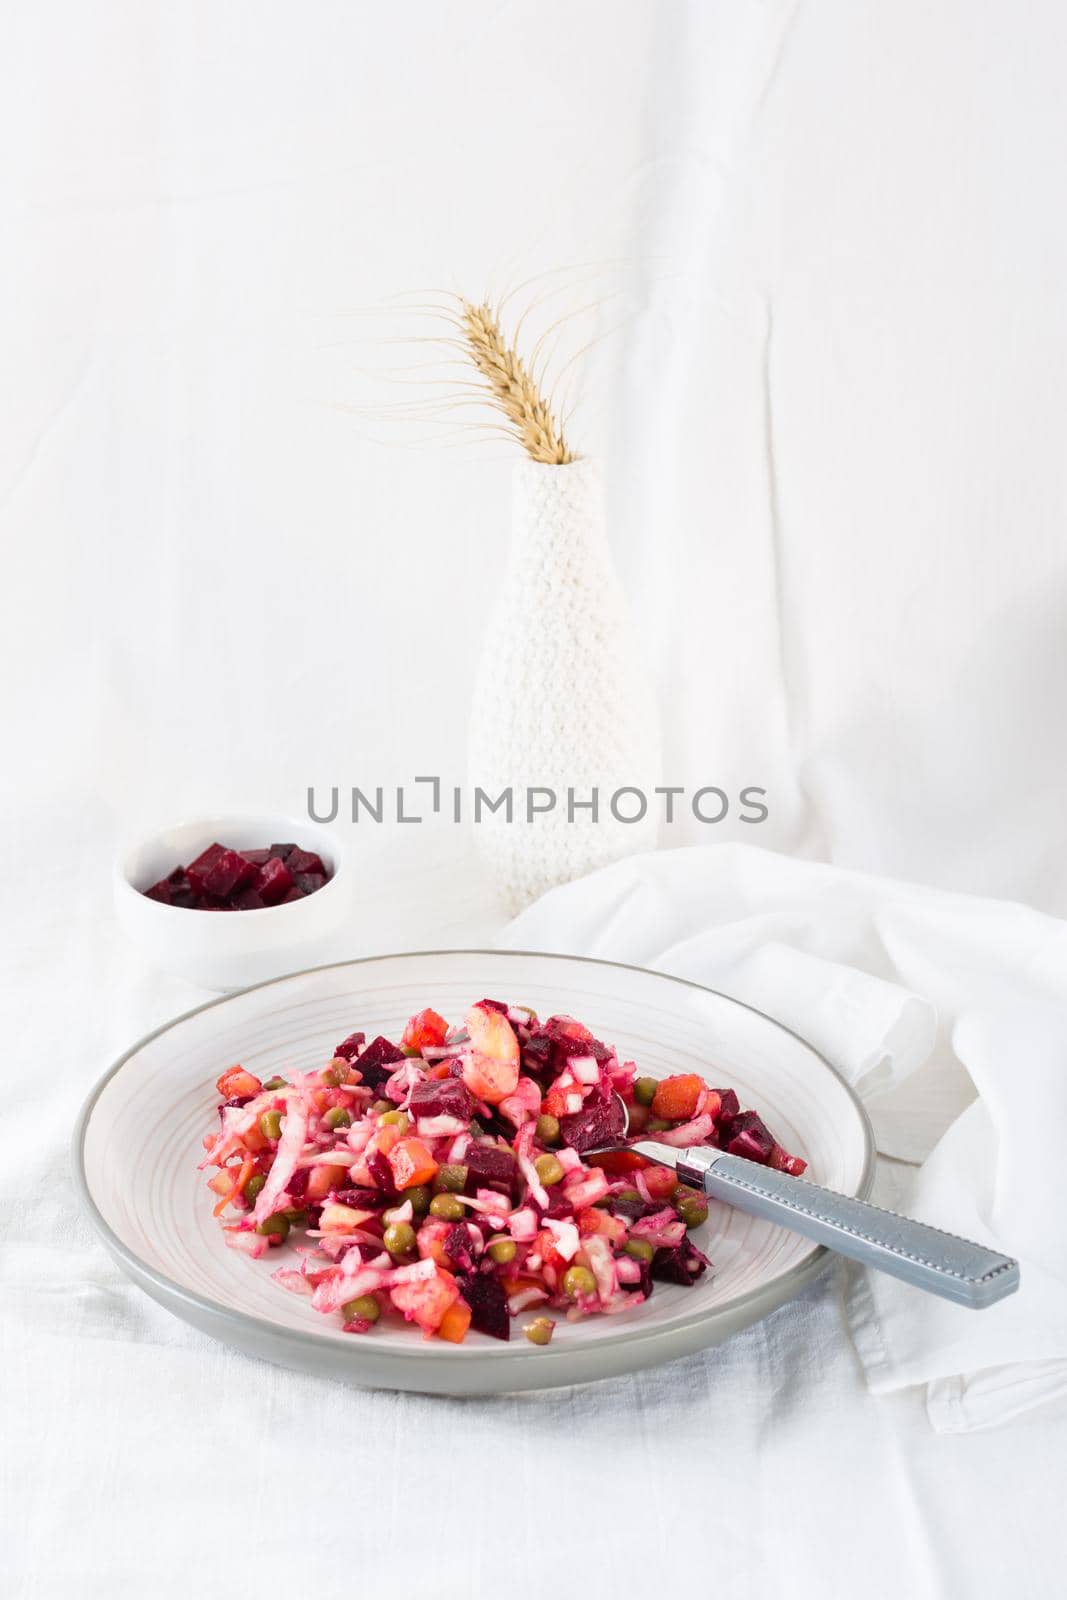 Russian traditional salad with vegetables - vinaigrette and spoon  on a plate and a bowl of beets on a table on a cloth. Vertical view